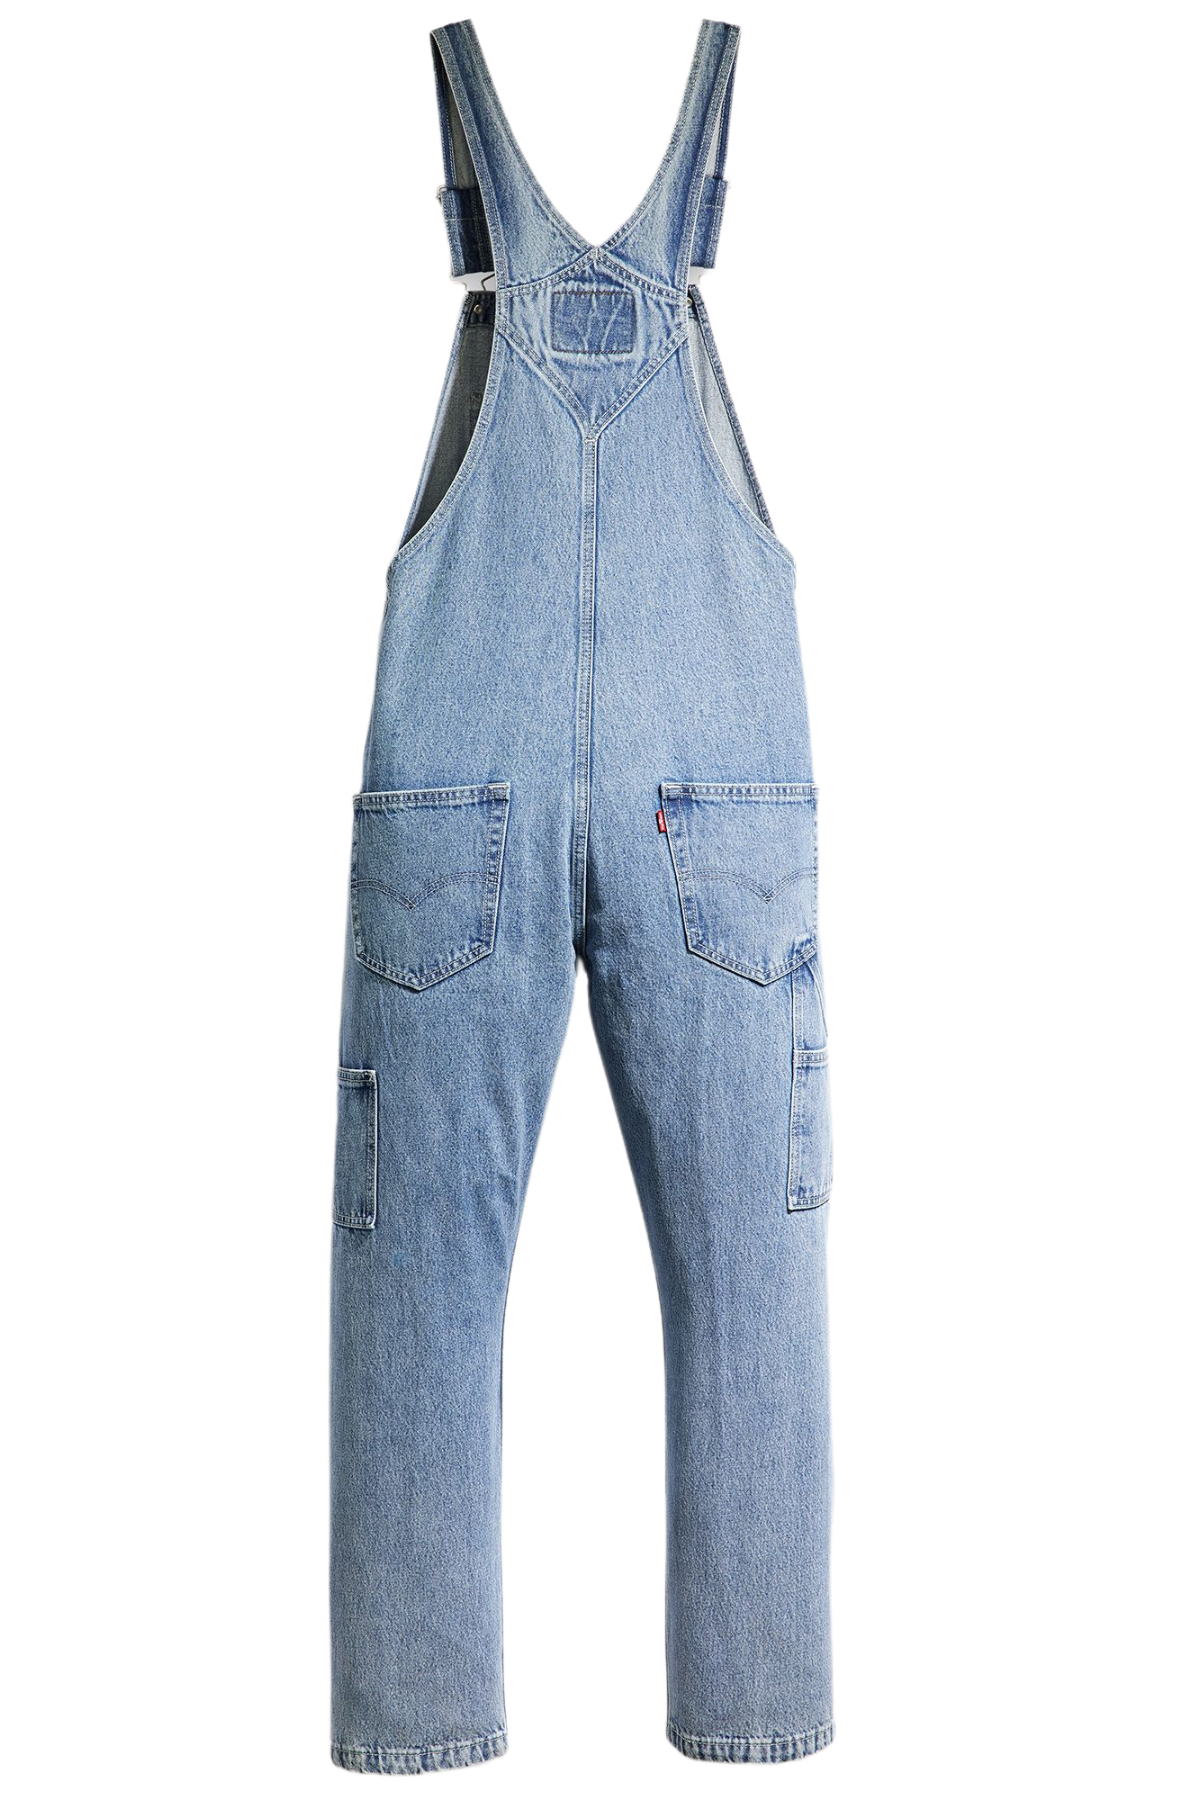 Levi's® Red Tab™ Put In Work Overall Denim Dungarees - Blue 